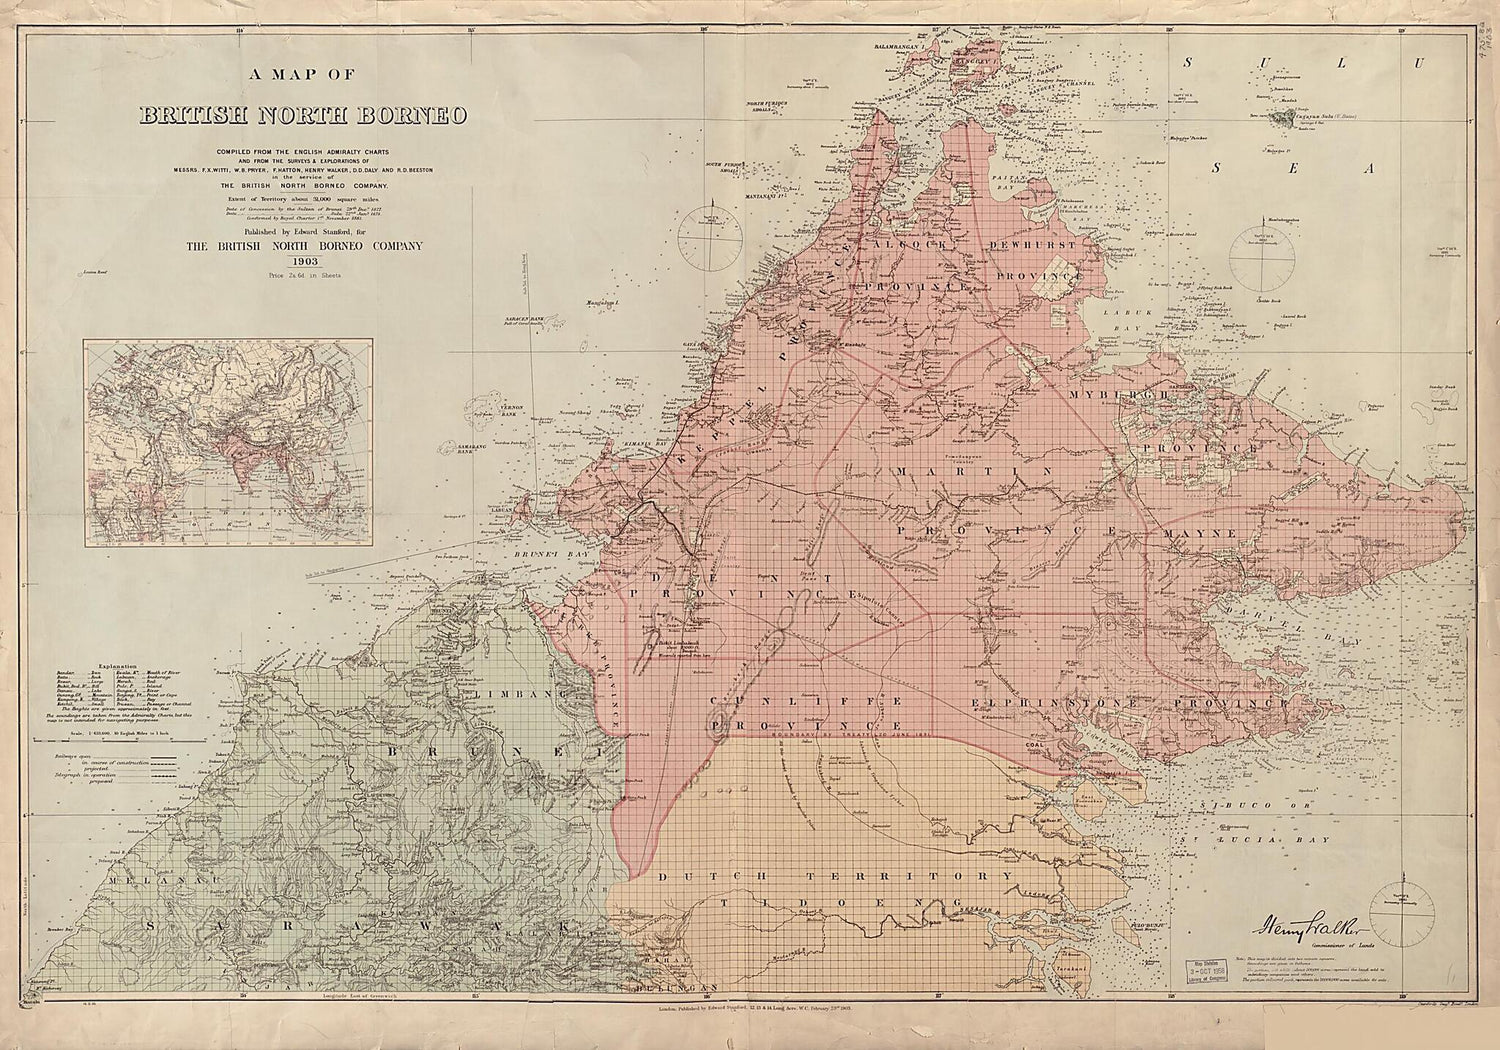 This old map of A Map of British North Borneo from 1903 was created by  British North Borneo Chartered Company,  Edward Stanford Ltd in 1903